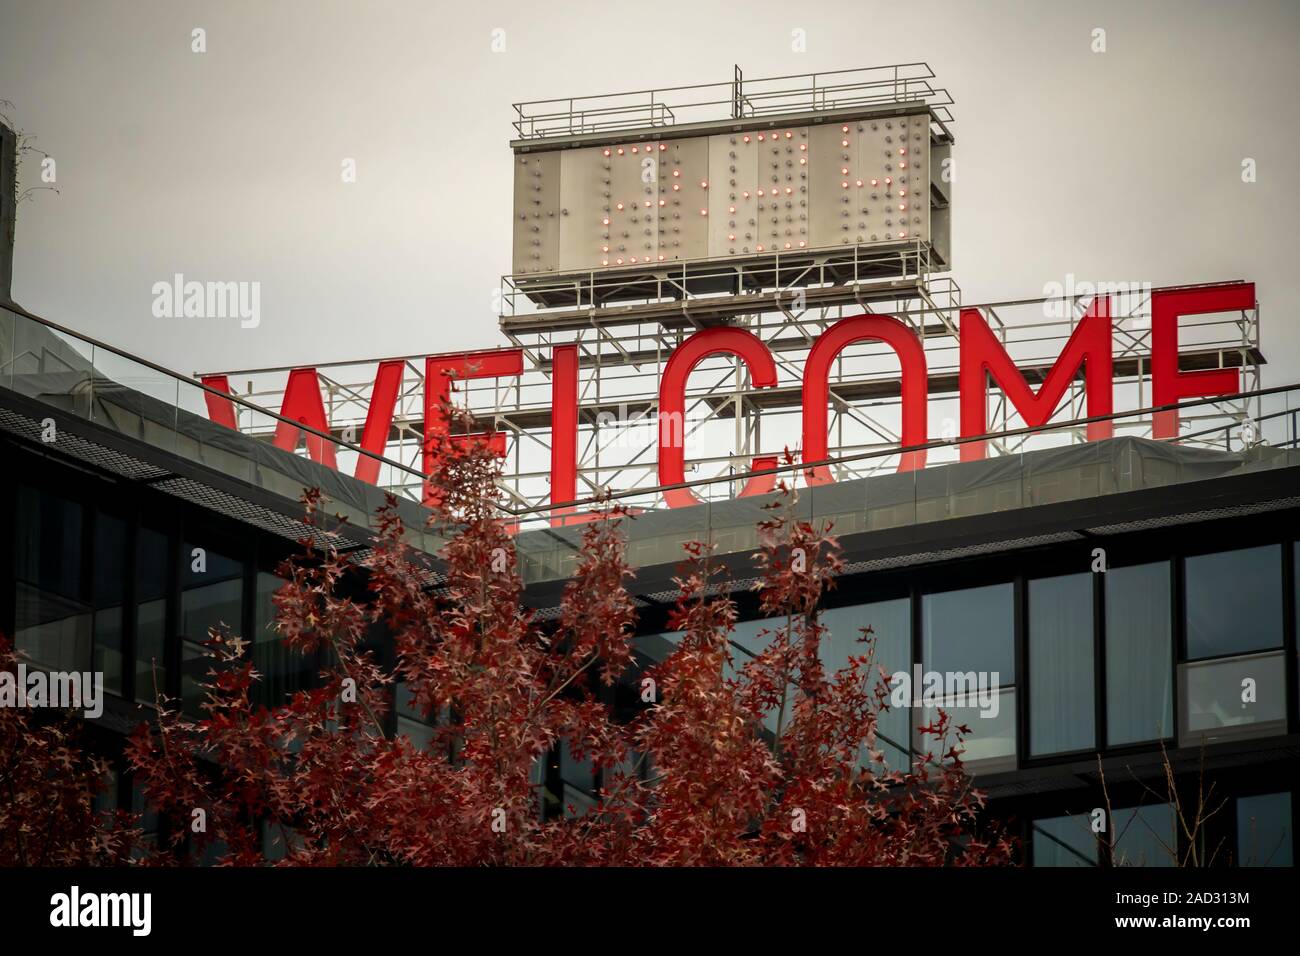 The former Jehovah’s Witnesses headquarters which once supported a huge Watchtower sign, has the sign replaced with “Welcome”, visible to all entering Brooklyn, in New York on Wednesday, November 27, 2019.  © Richard B. Levine) Stock Photo